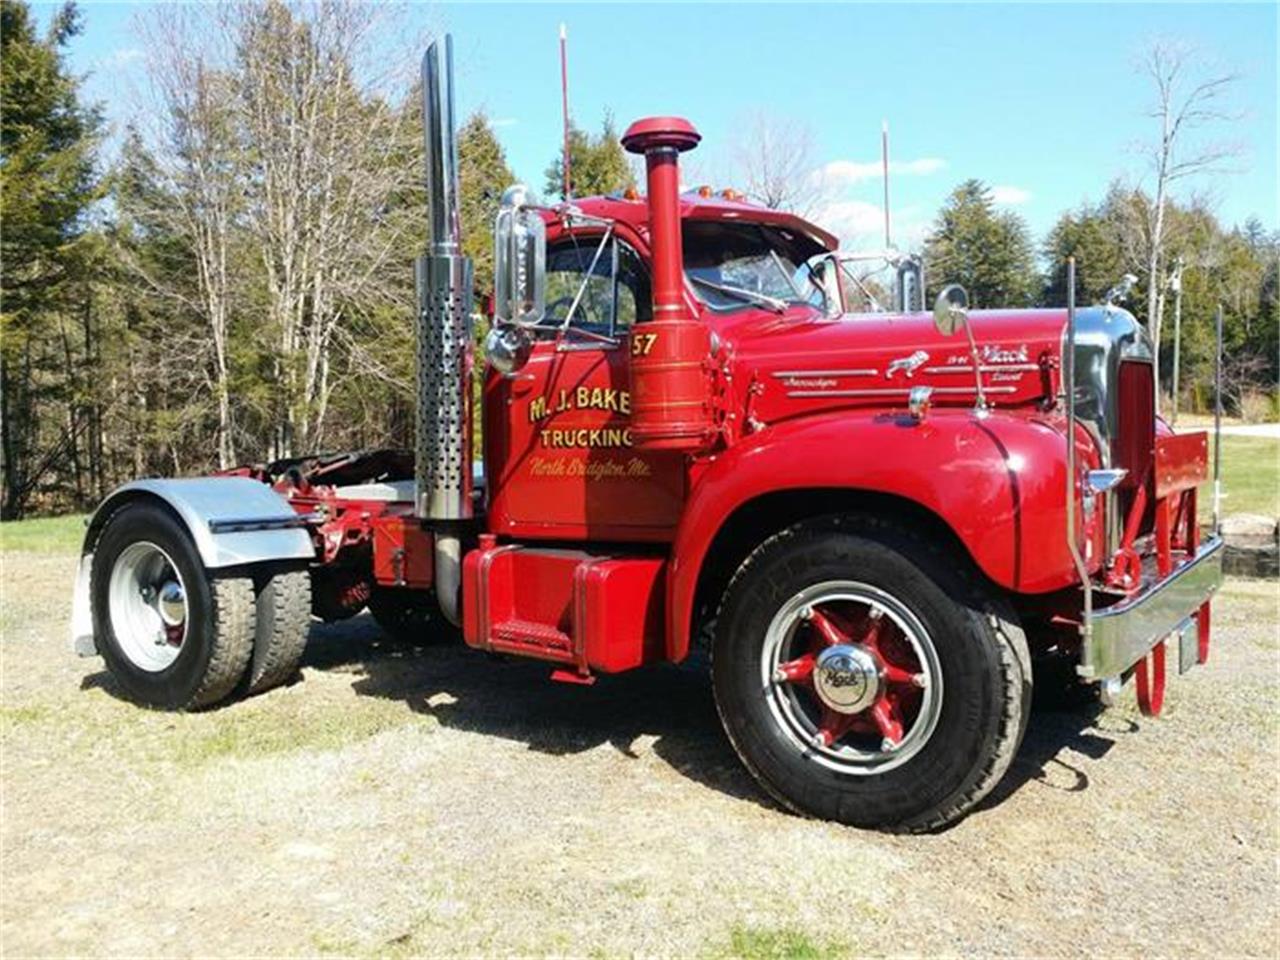 For Sale at Auction: 1957 Mack B-61 in Owls Head, Maine.